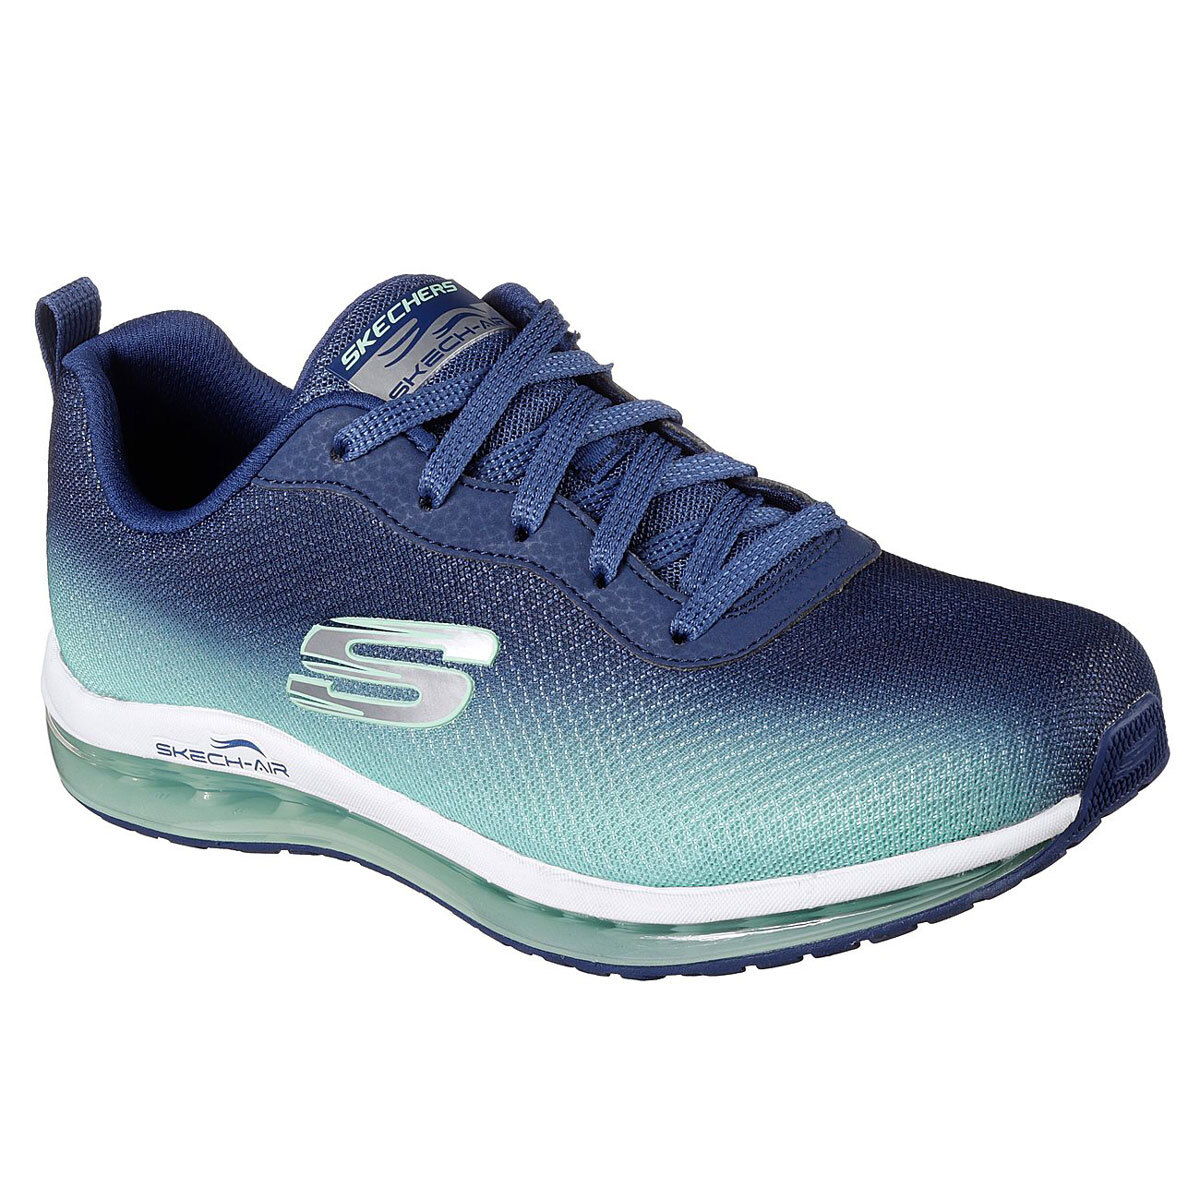 where can i buy skechers shoes in uk